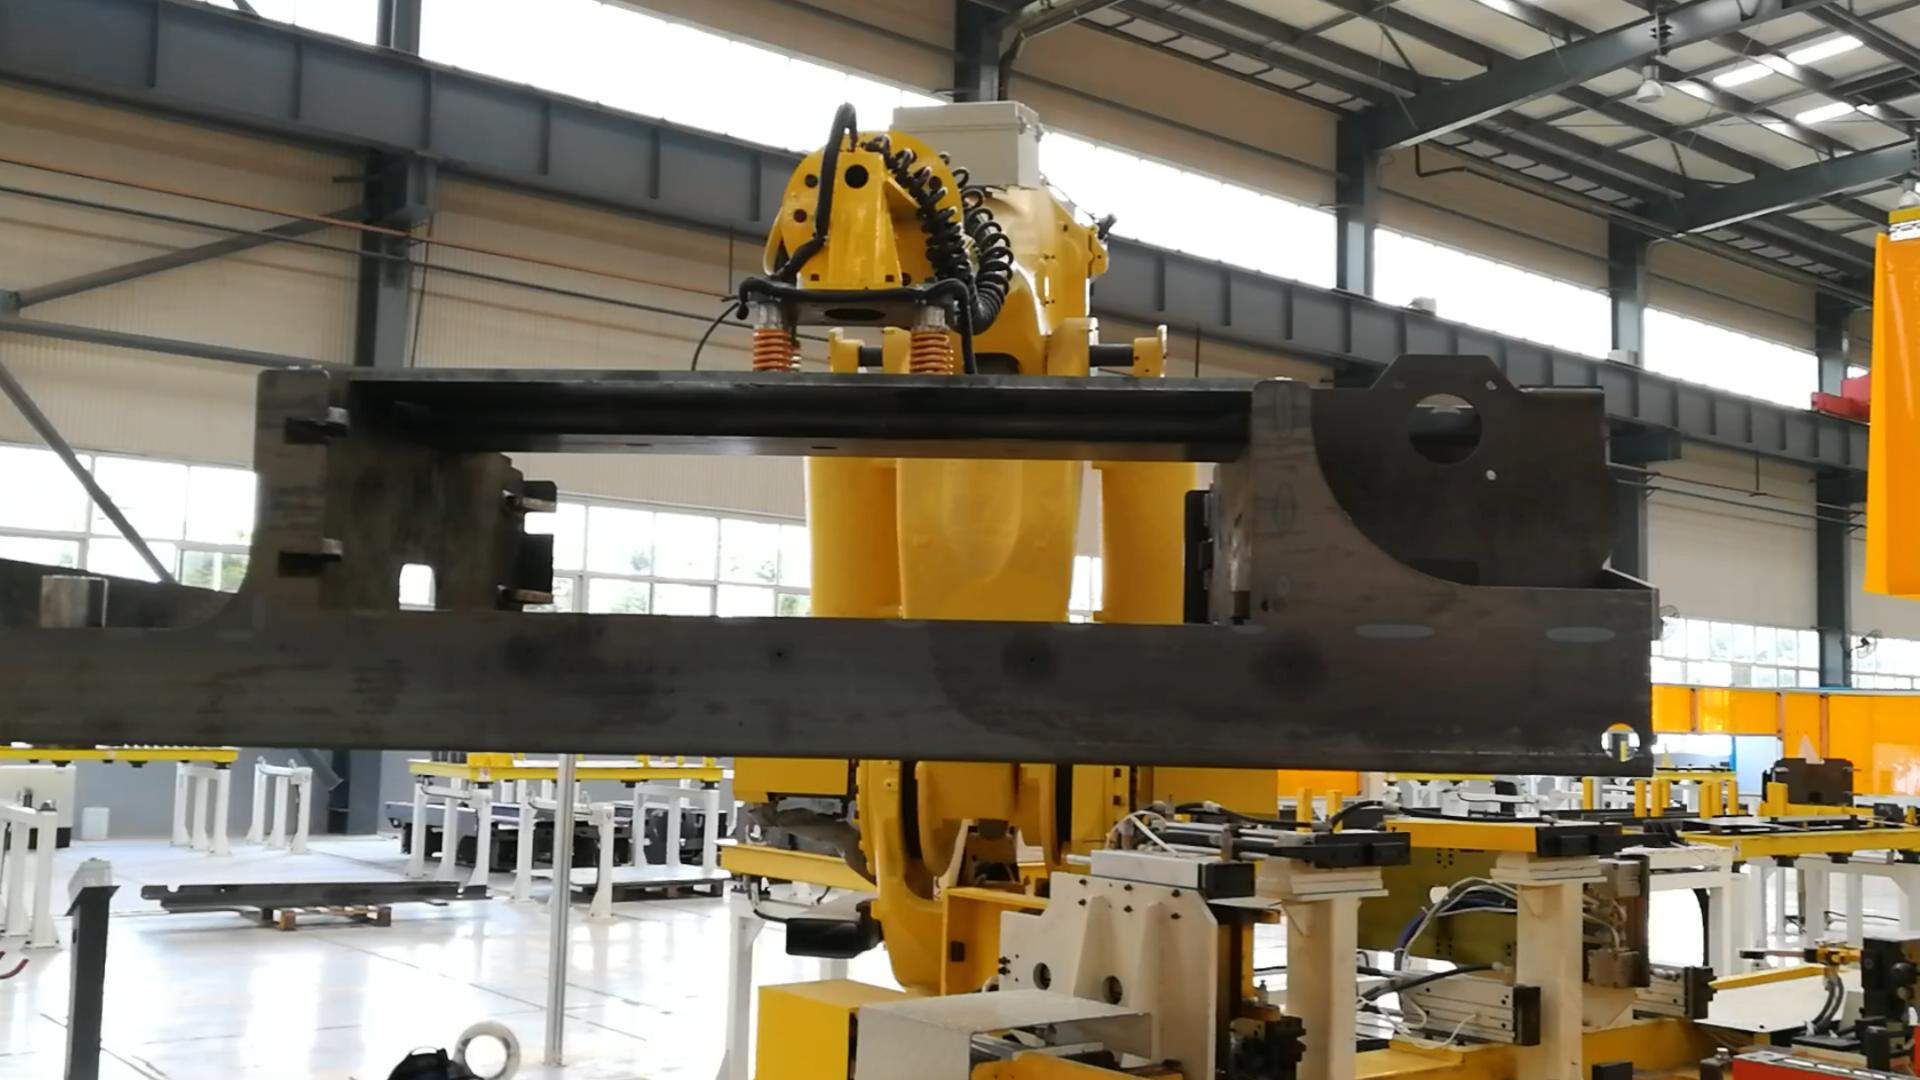 Pick and Place Magnet on Robot Arm Lifting Steel Workpiece for Welding - HVR MAG